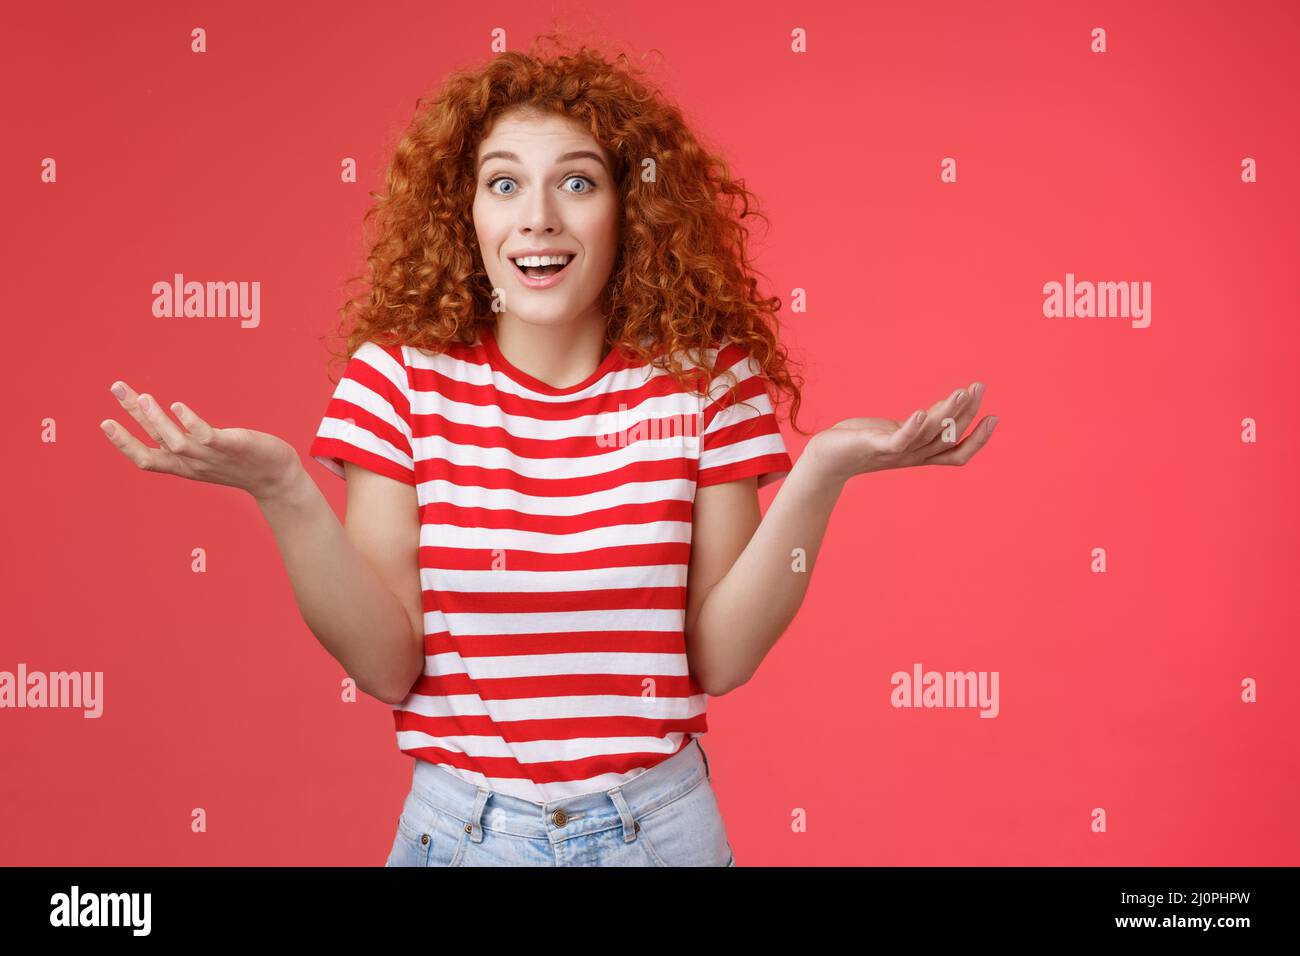 Unaware carefree clueless attractive redhead woman curly hairstyle shrugging unaware hands spread sideways smiling uncertain ask Stock Photo